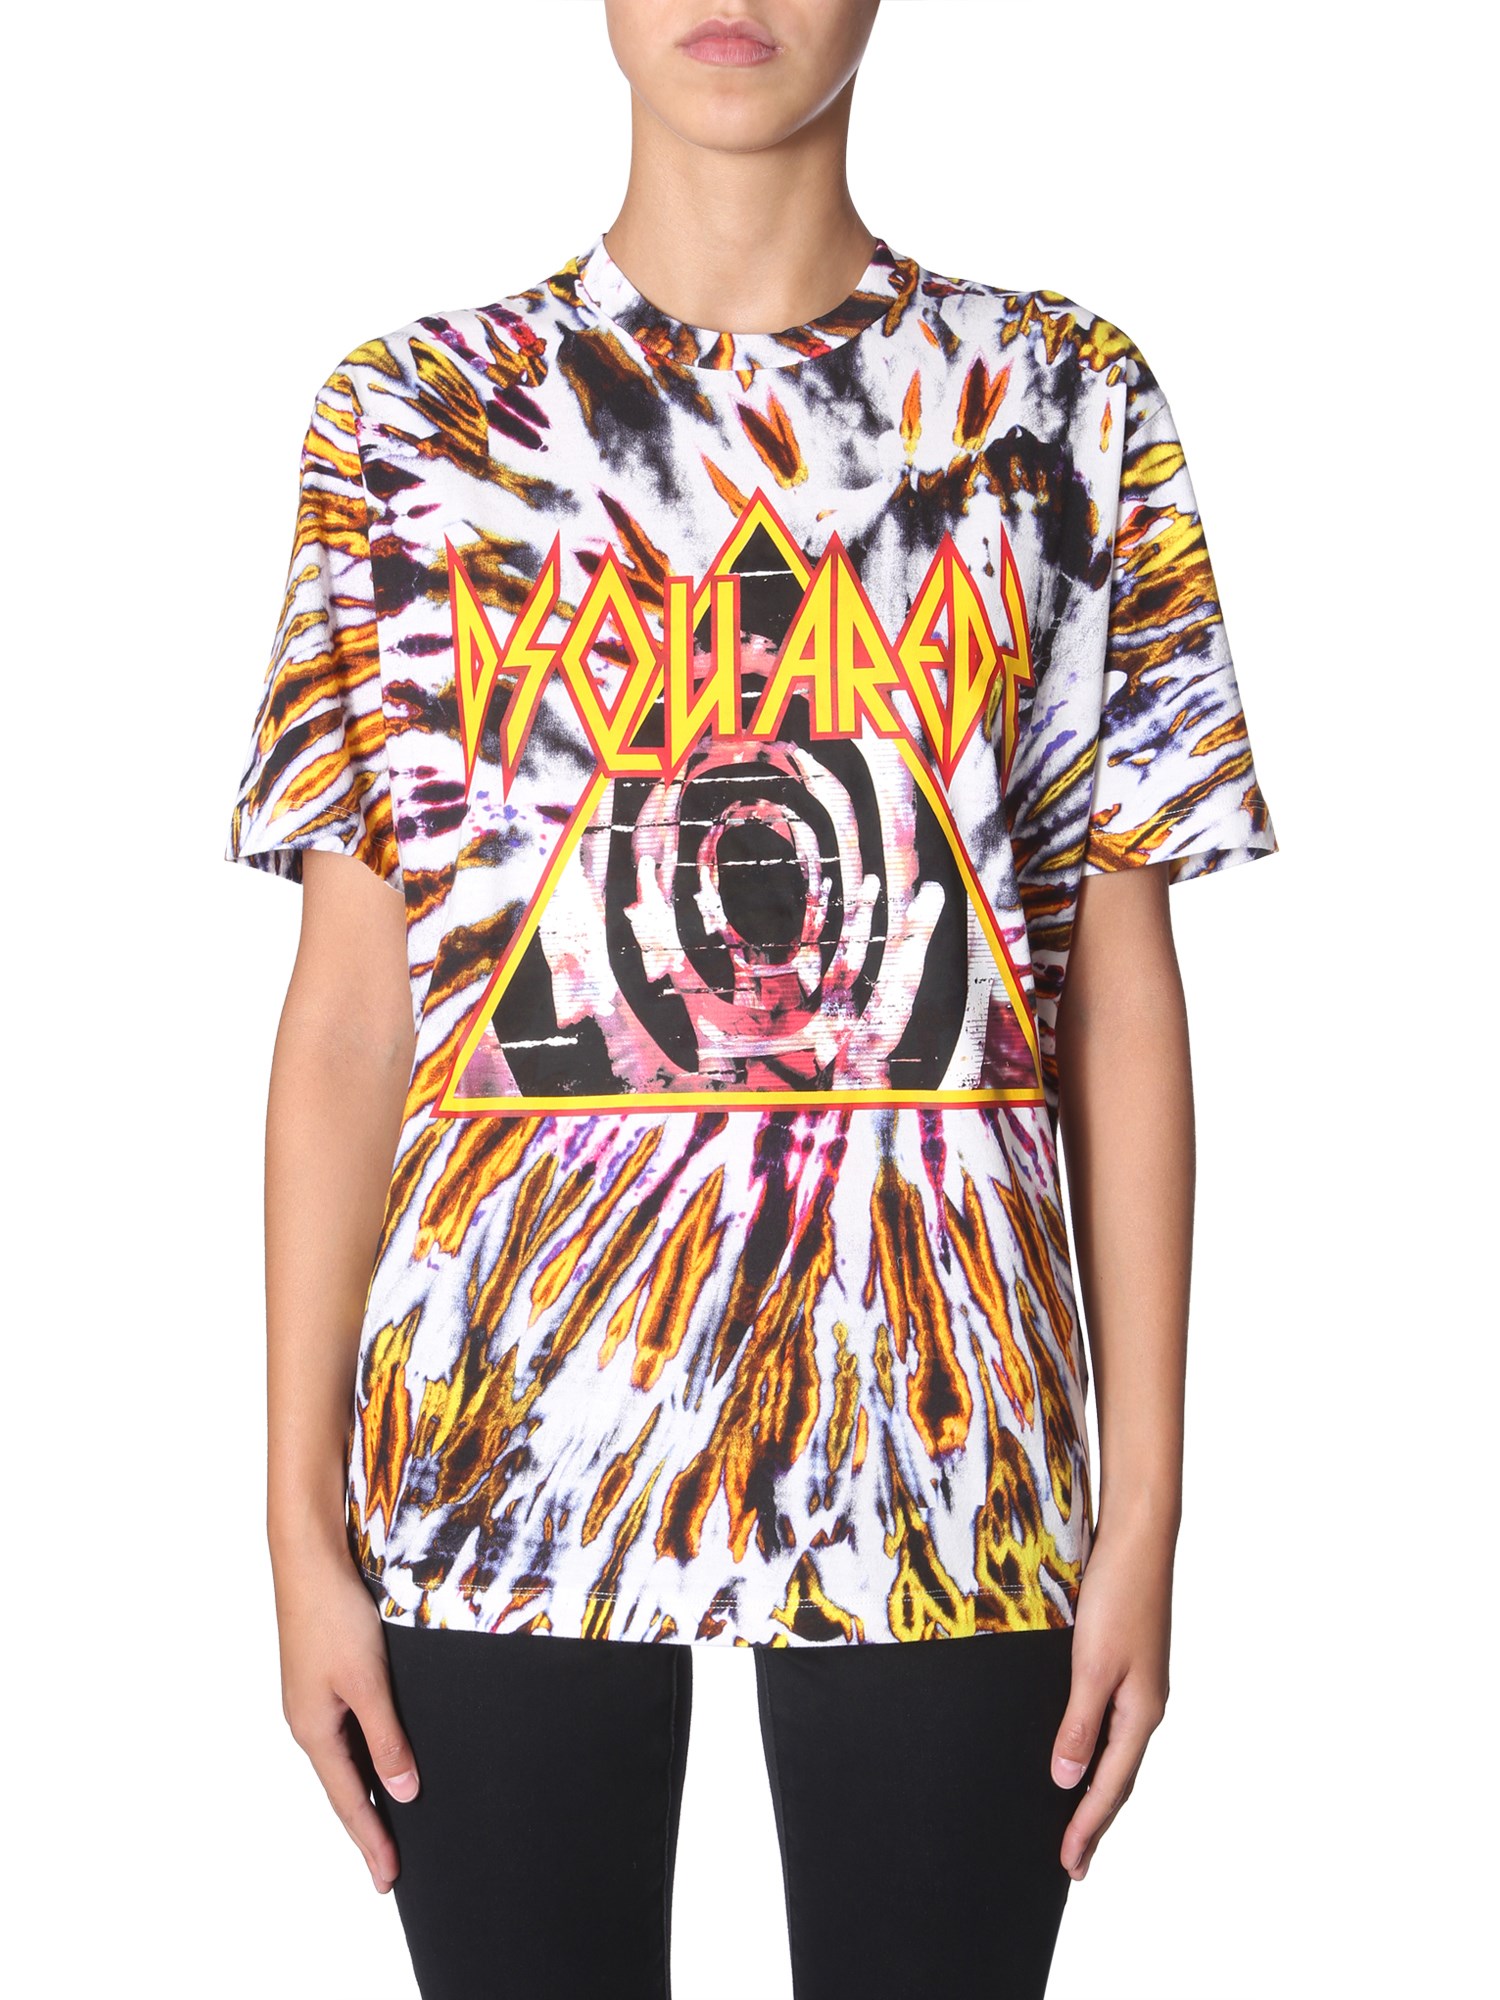 dsquared tie and dye print t-shirt